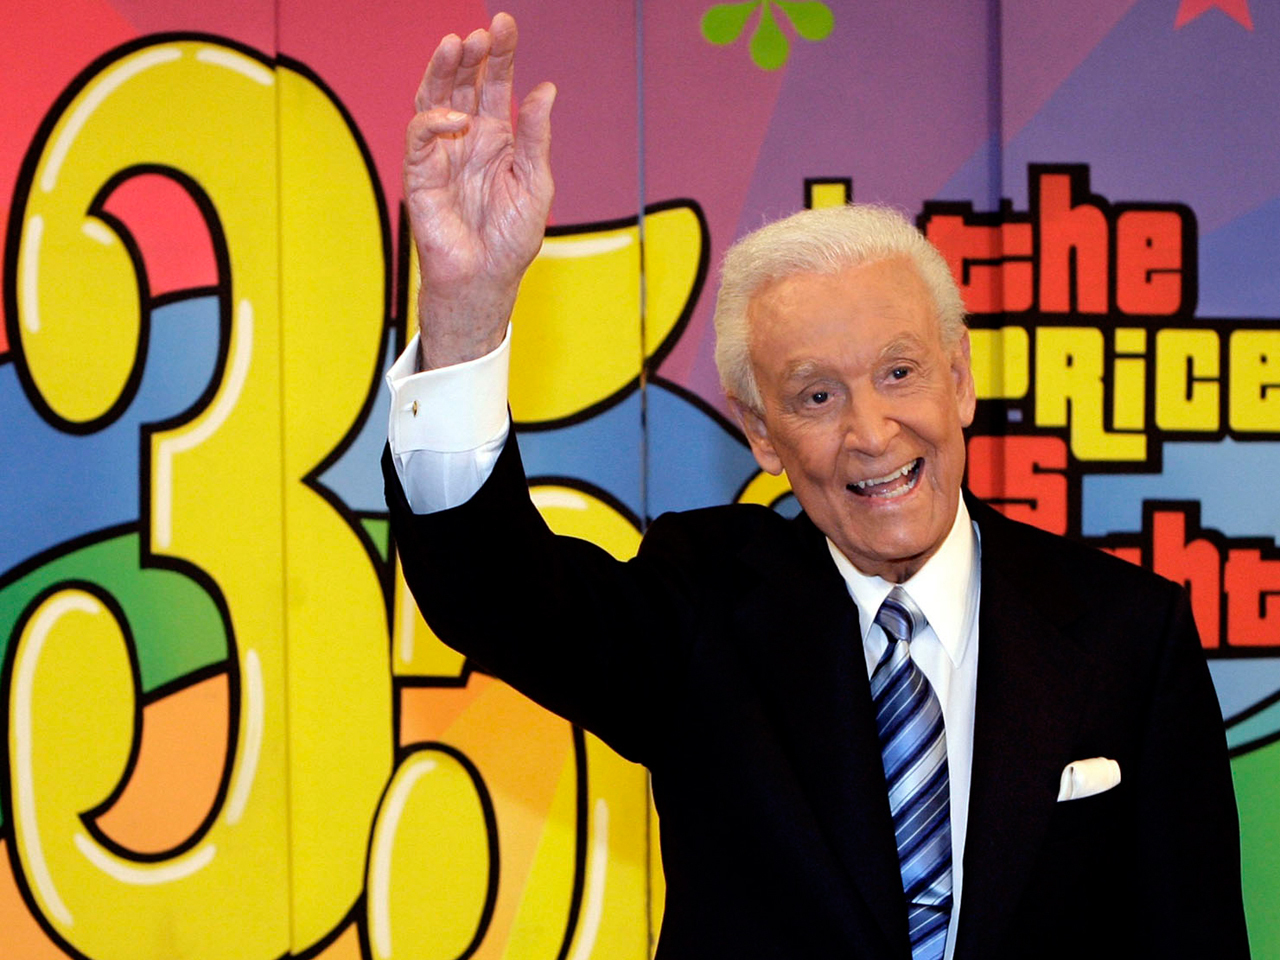 price is right host